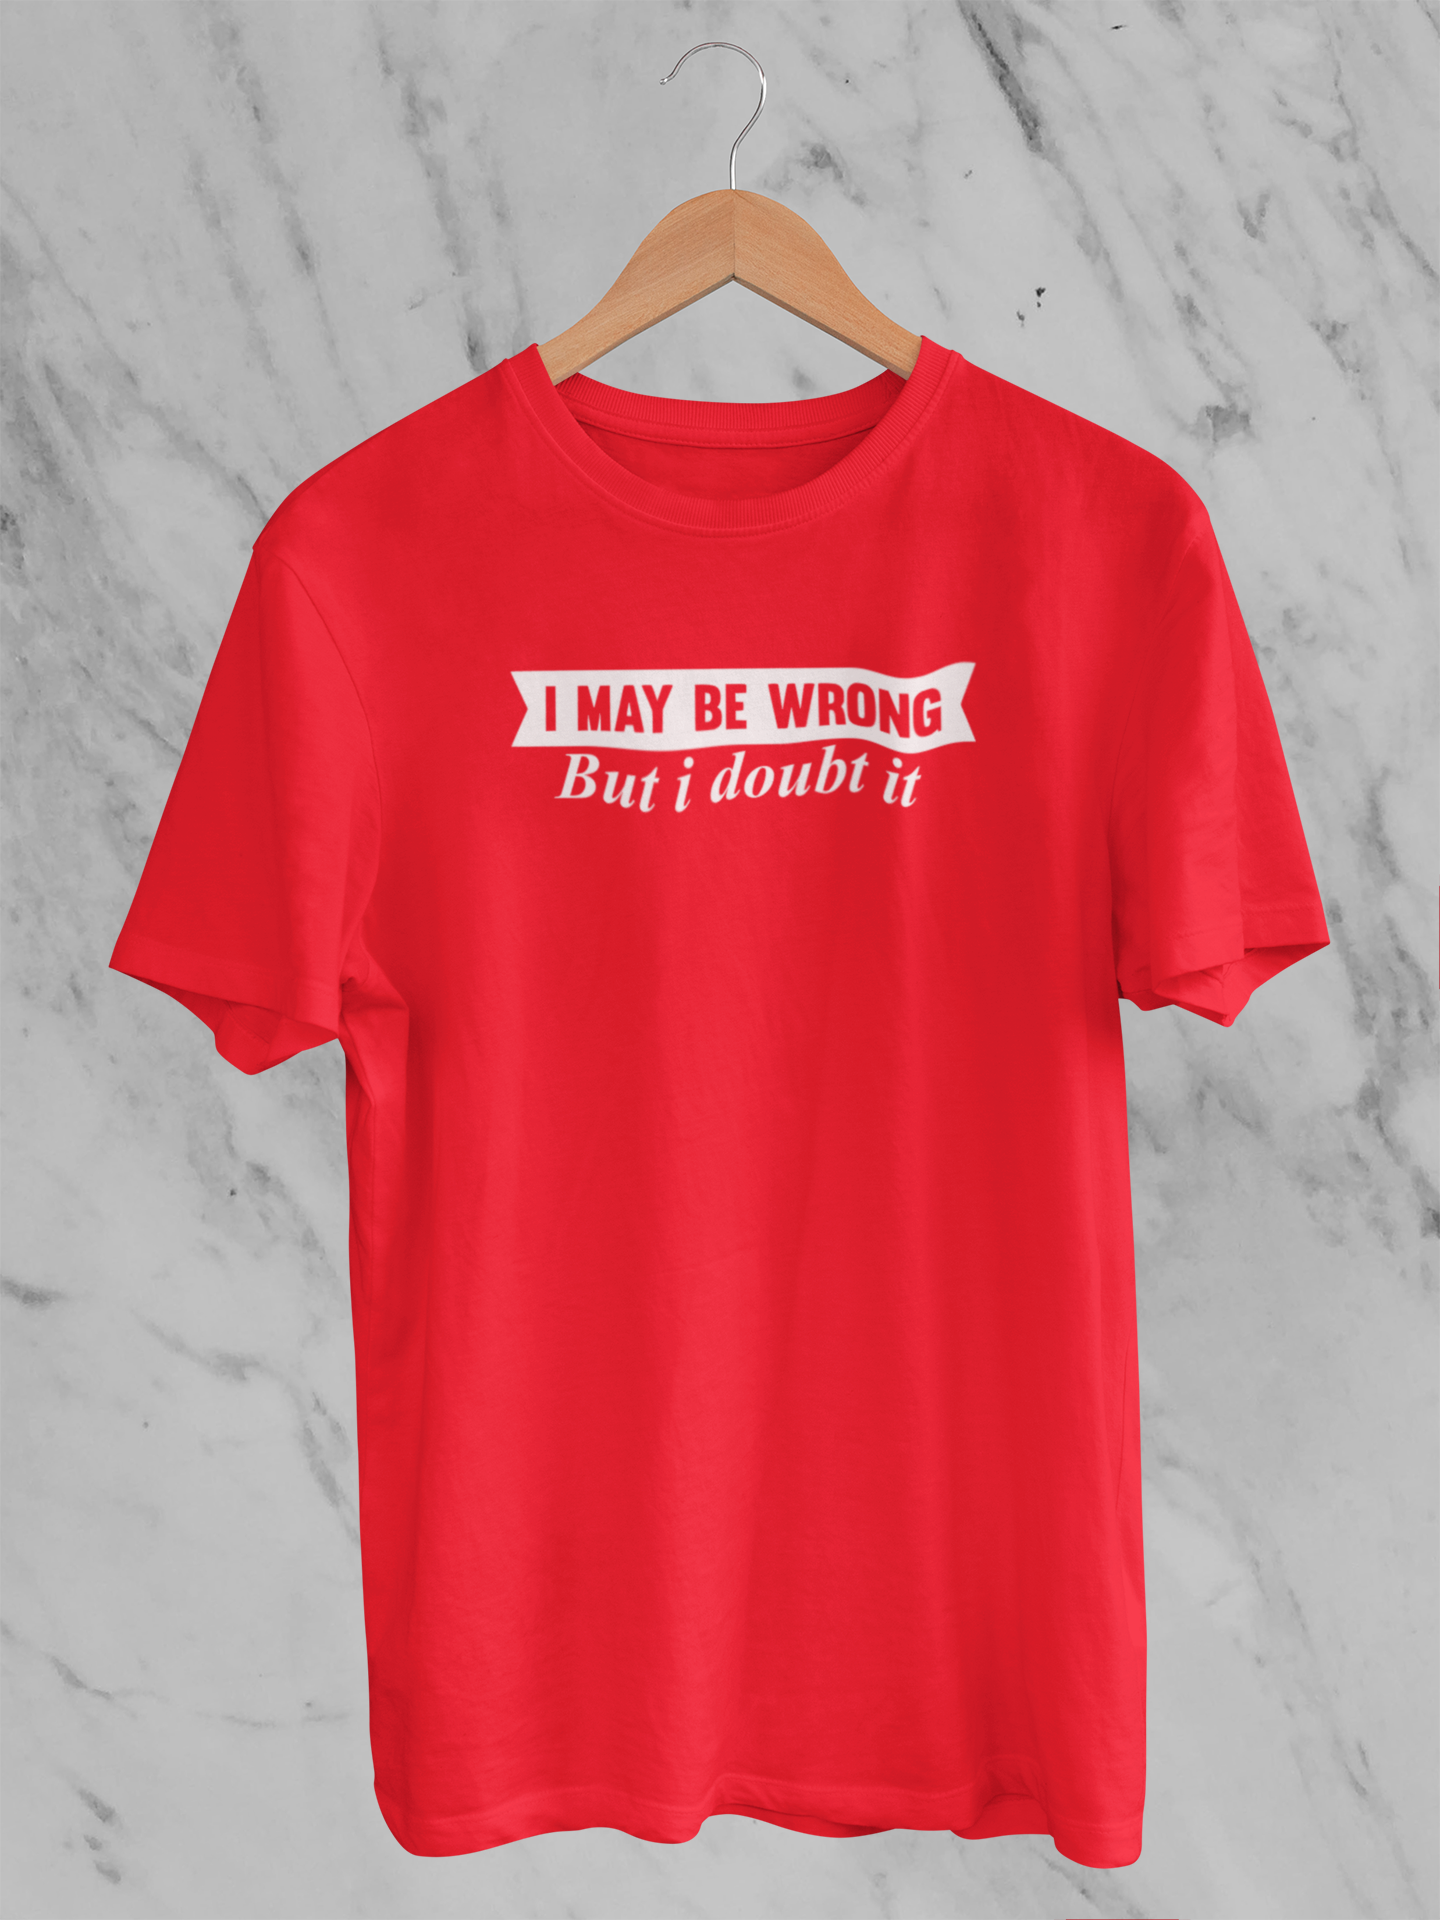 I may be wrong but I doubt it Tee